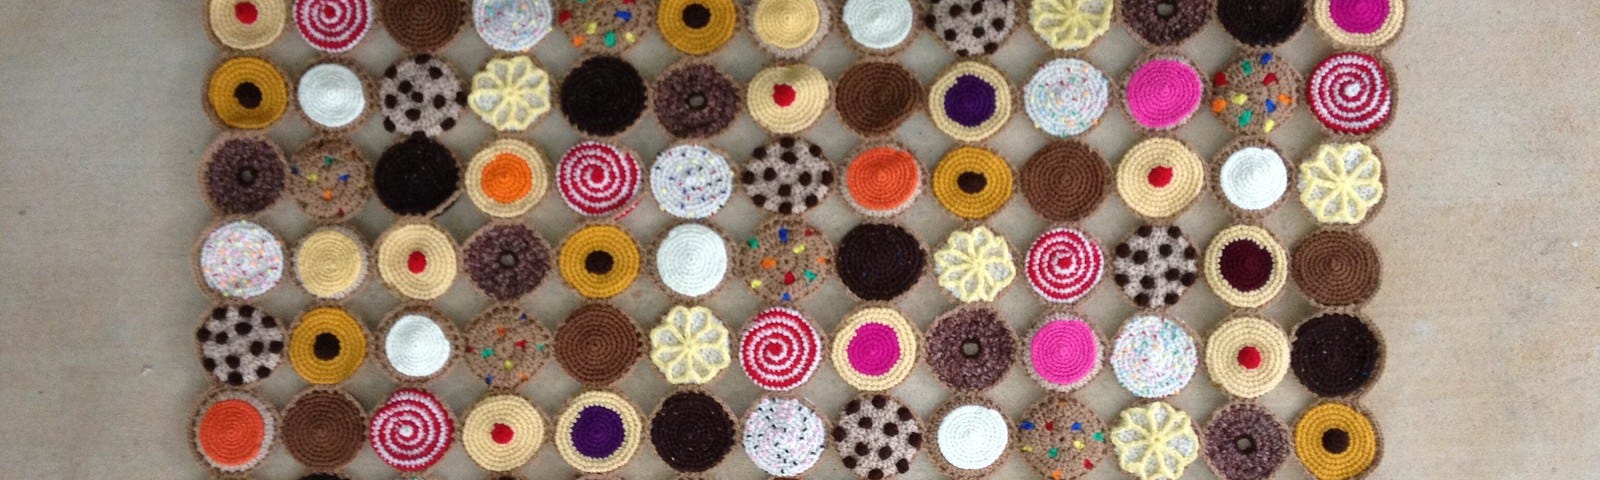 One hundred and sixty-nine crochet cookies by Leslie Stahlhut